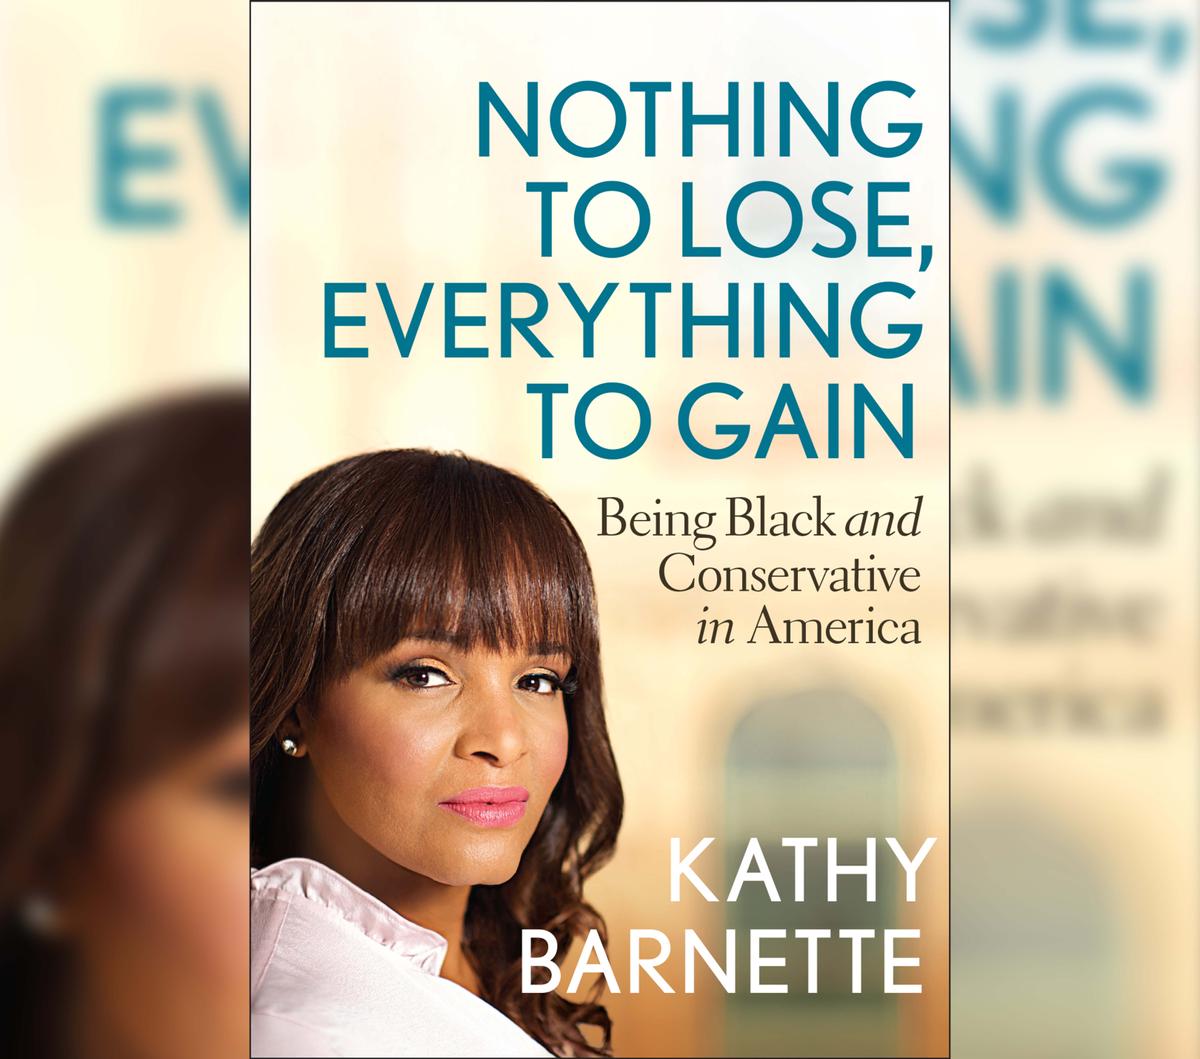 Kathy's book "Nothing to Lose, Everything to Gain." (Courtesy ofKathy Barnette)